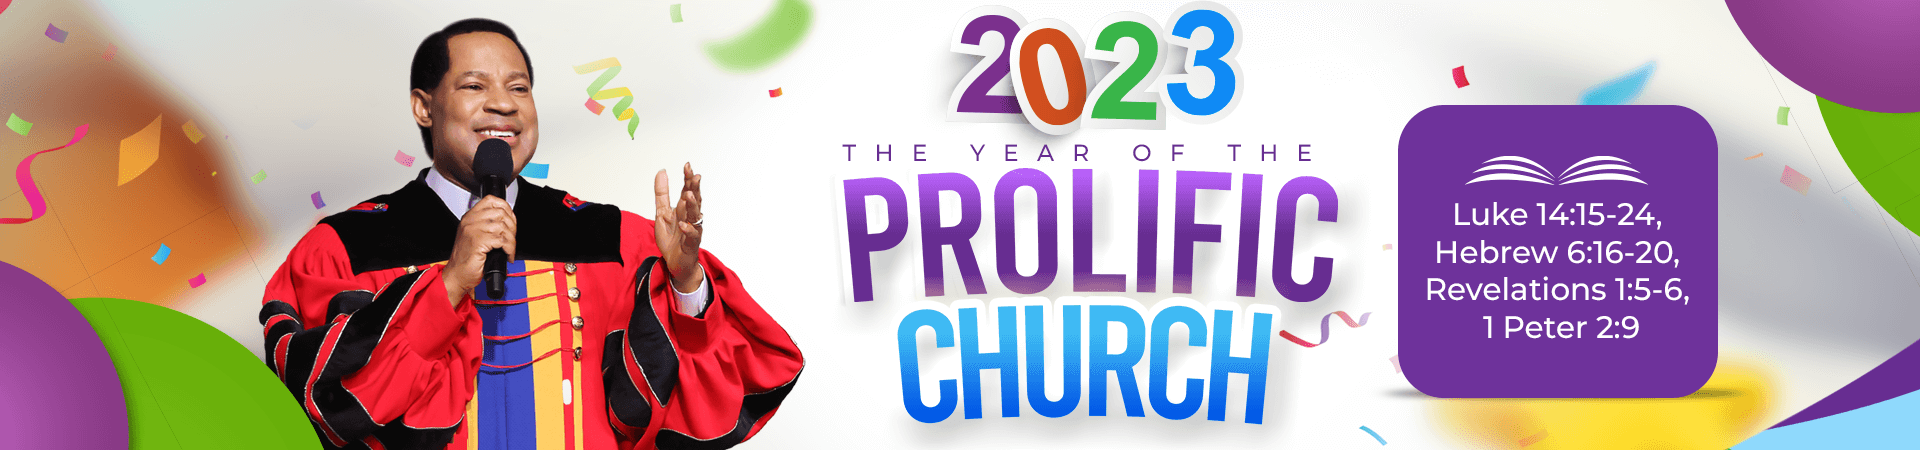 2023-THE-YEAR-OF-THE-PROLIFIC-CHURCH